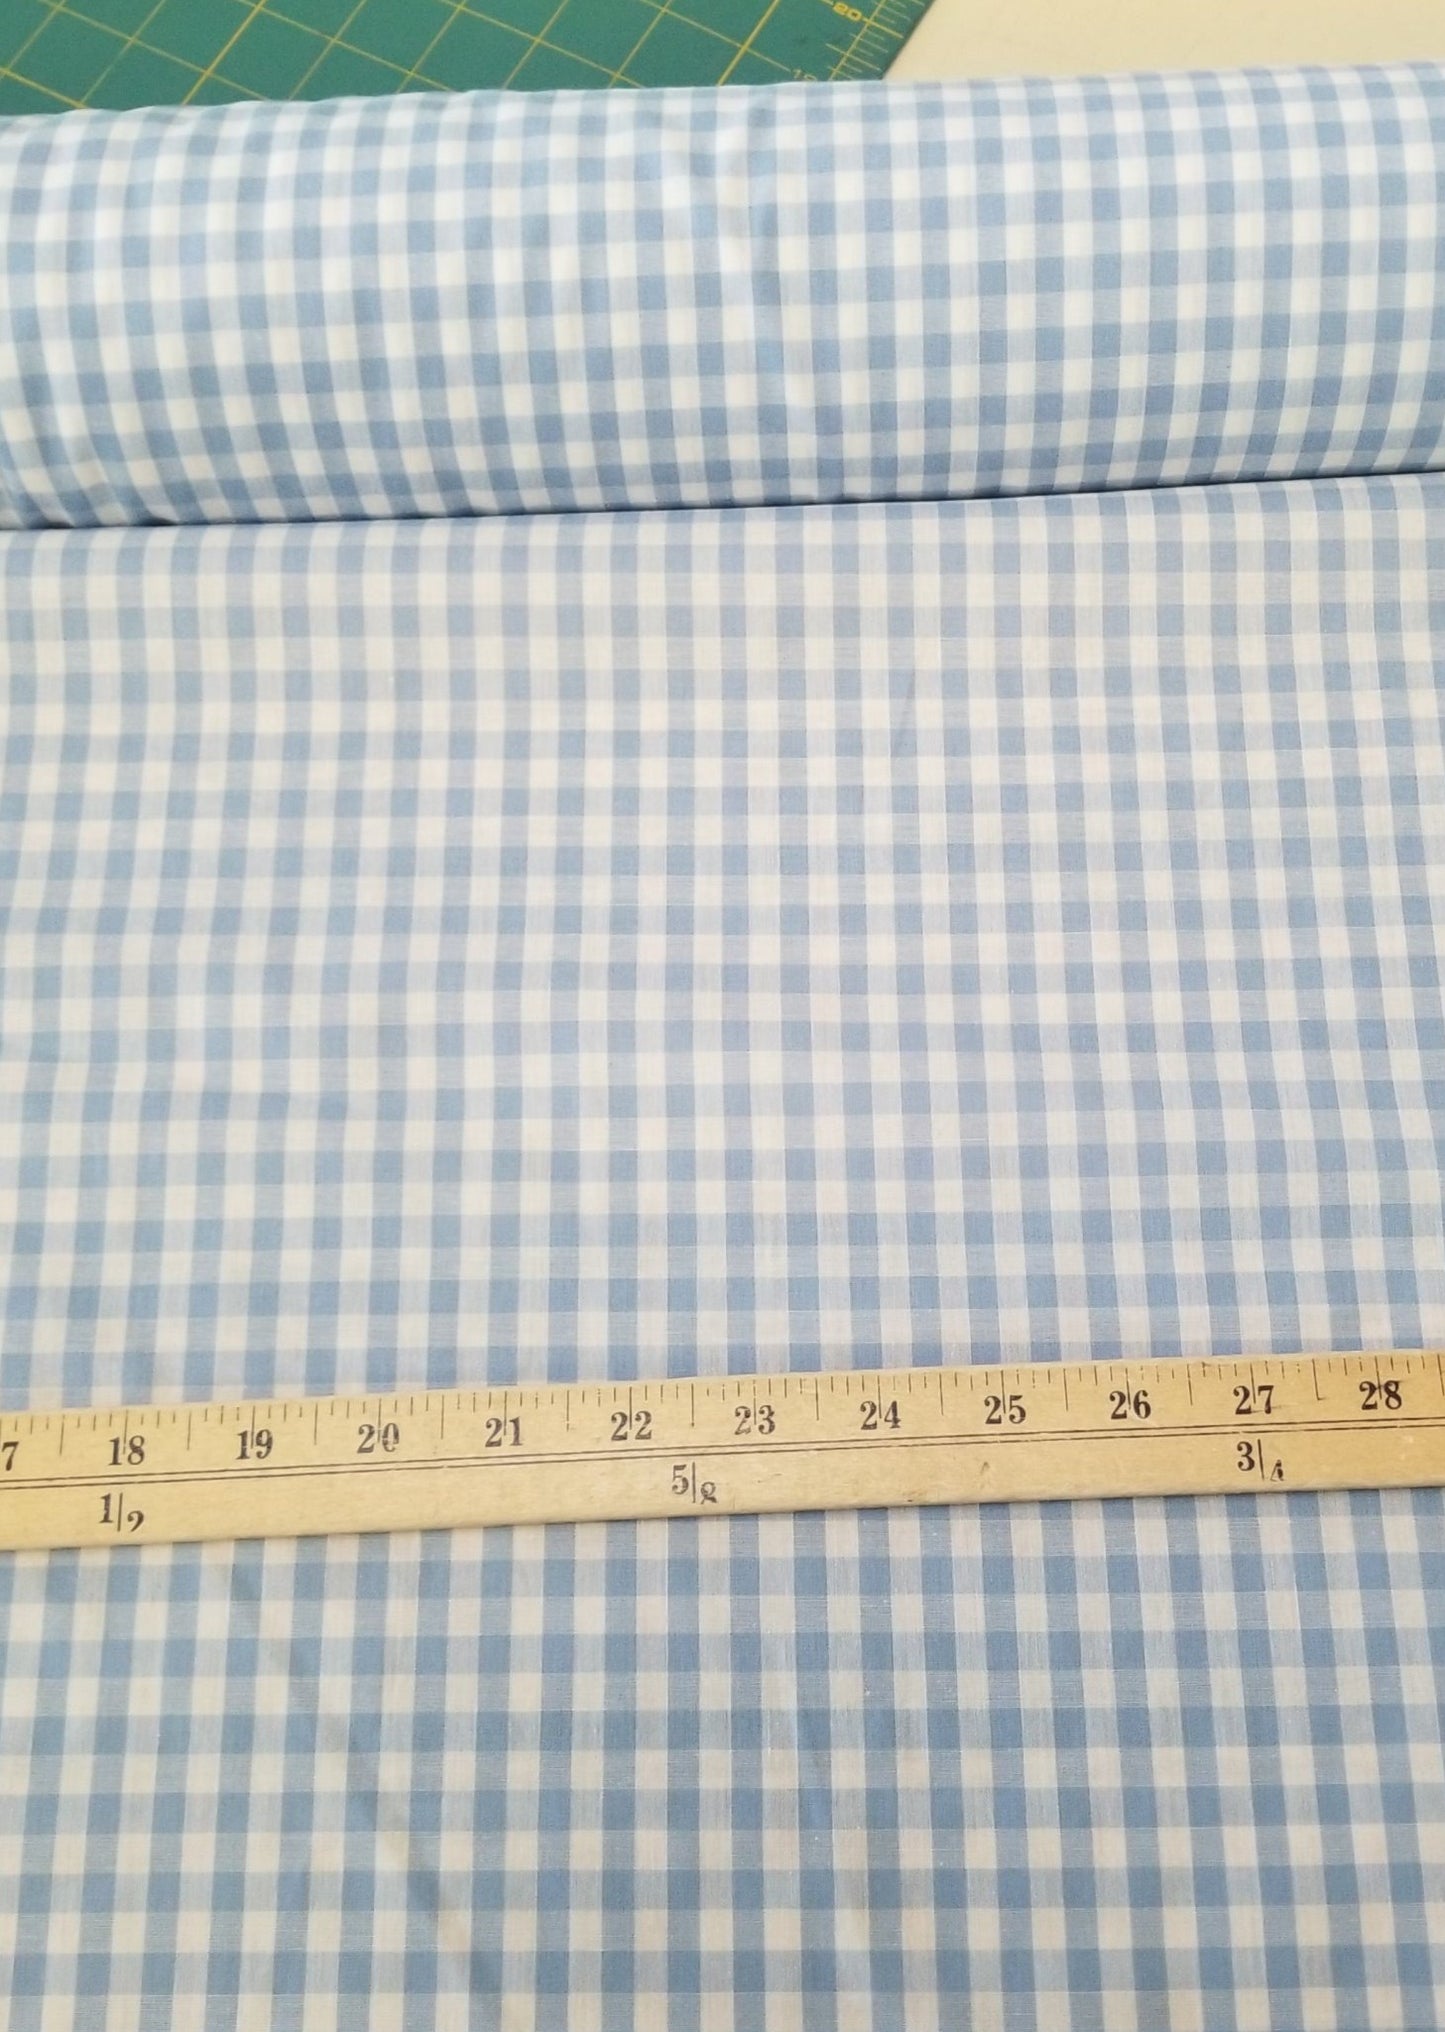 Designer Deadstock Gingham Cottage Blue Picnic Cotton Shirting Poplin Woven- by the yard